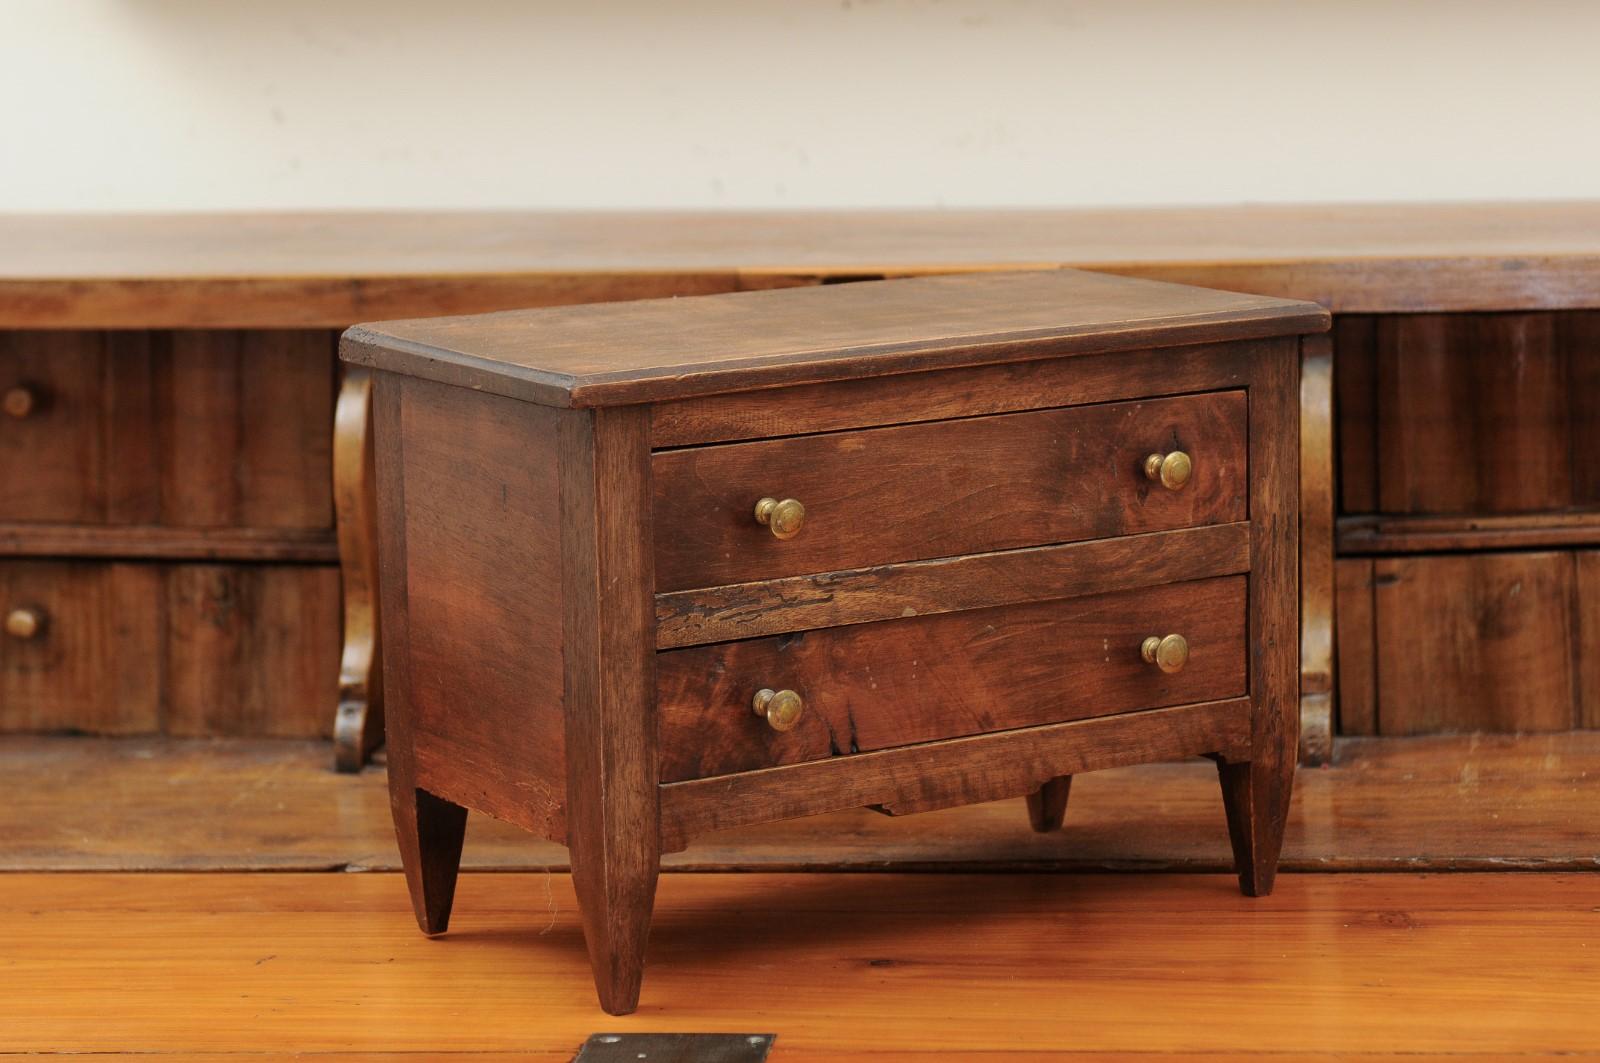 A French miniature walnut chest from the late 19th century with two drawers and tapered legs. Created in France during the last decade of the 19th century likely to be a salesman sample, this miniature chest features a rectangular top sitting above